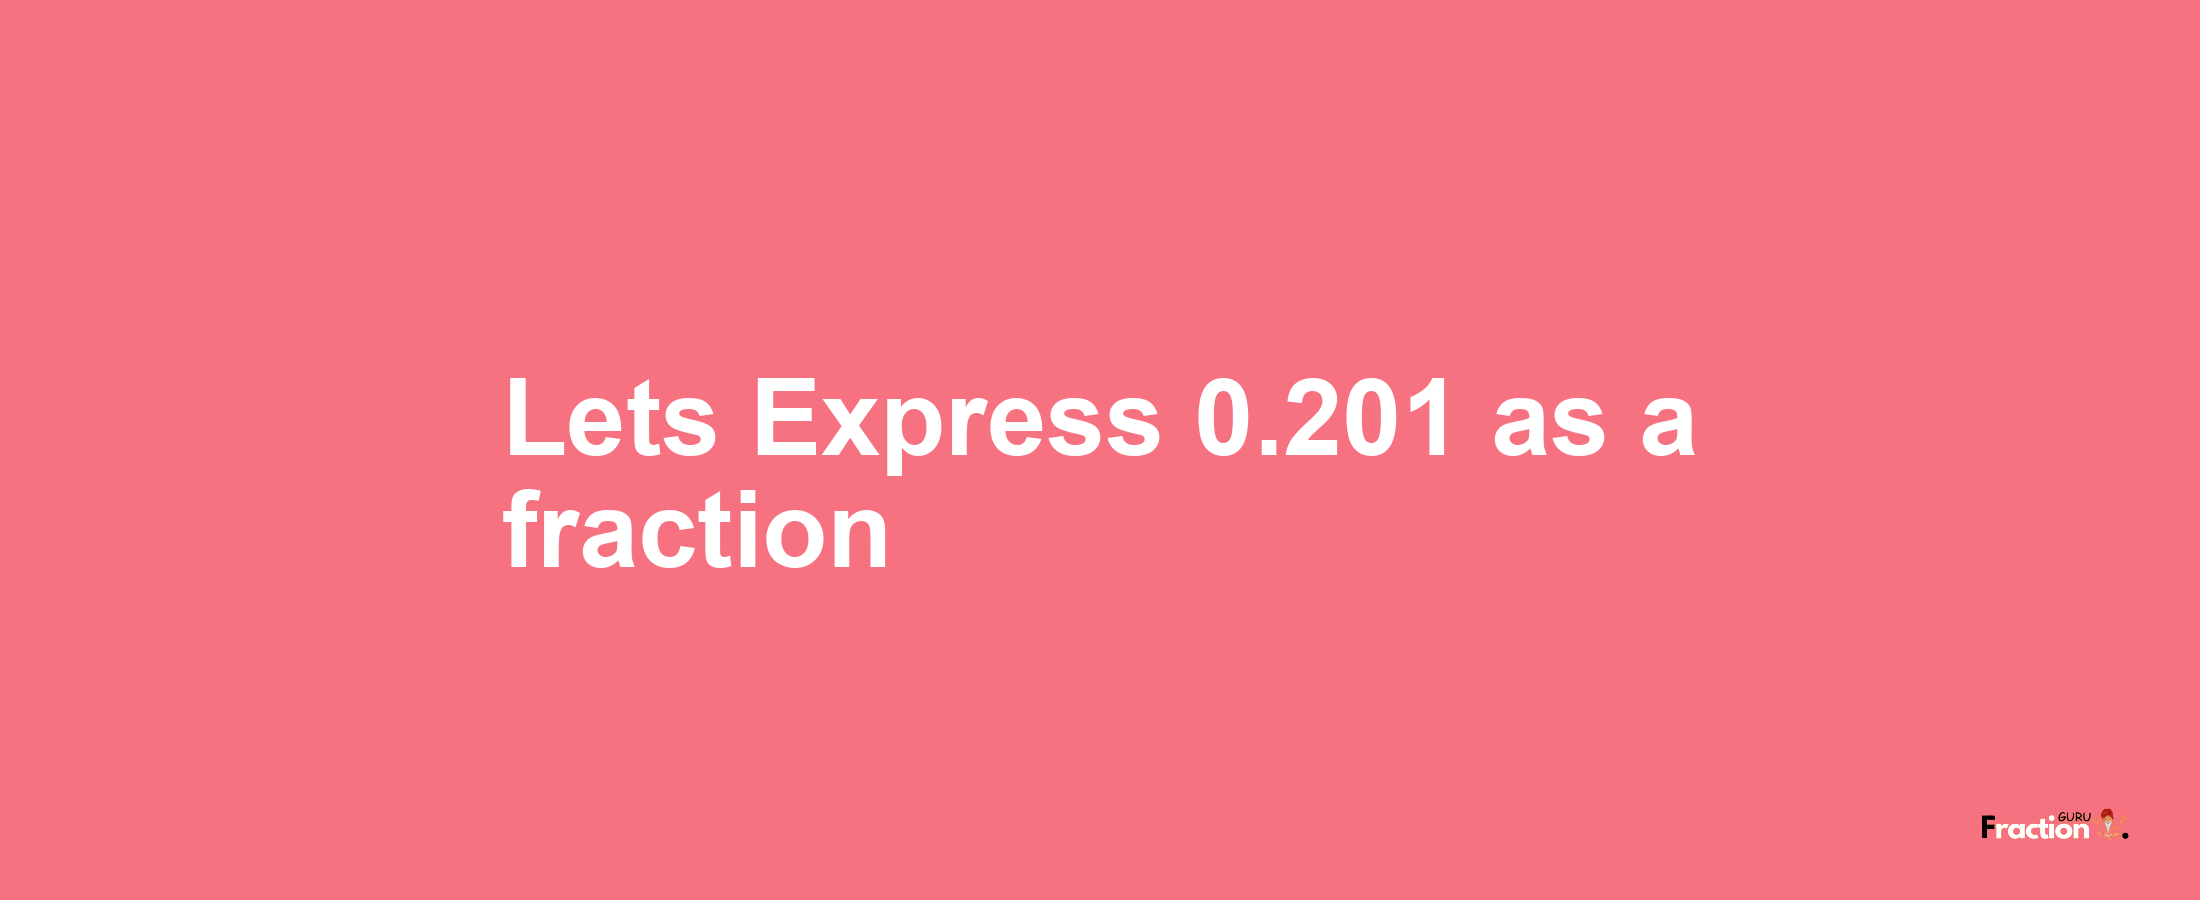 Lets Express 0.201 as afraction